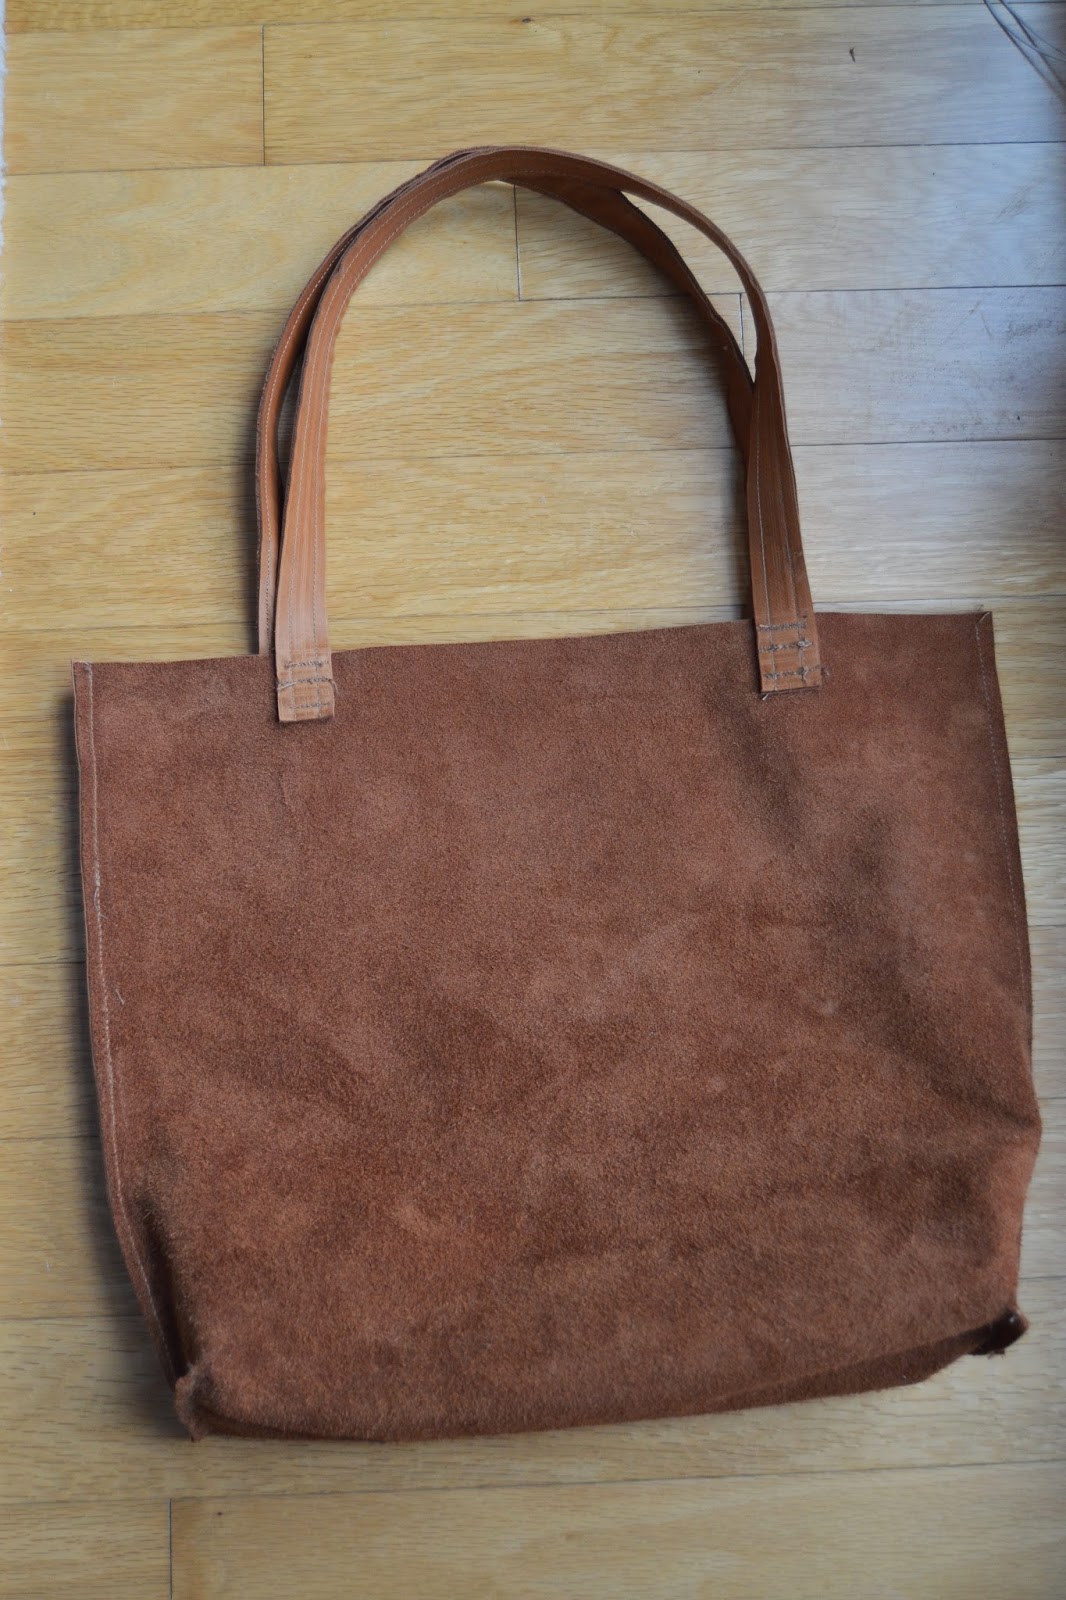 The Crafty Novice: DIY Sew: Leather Tote Bag